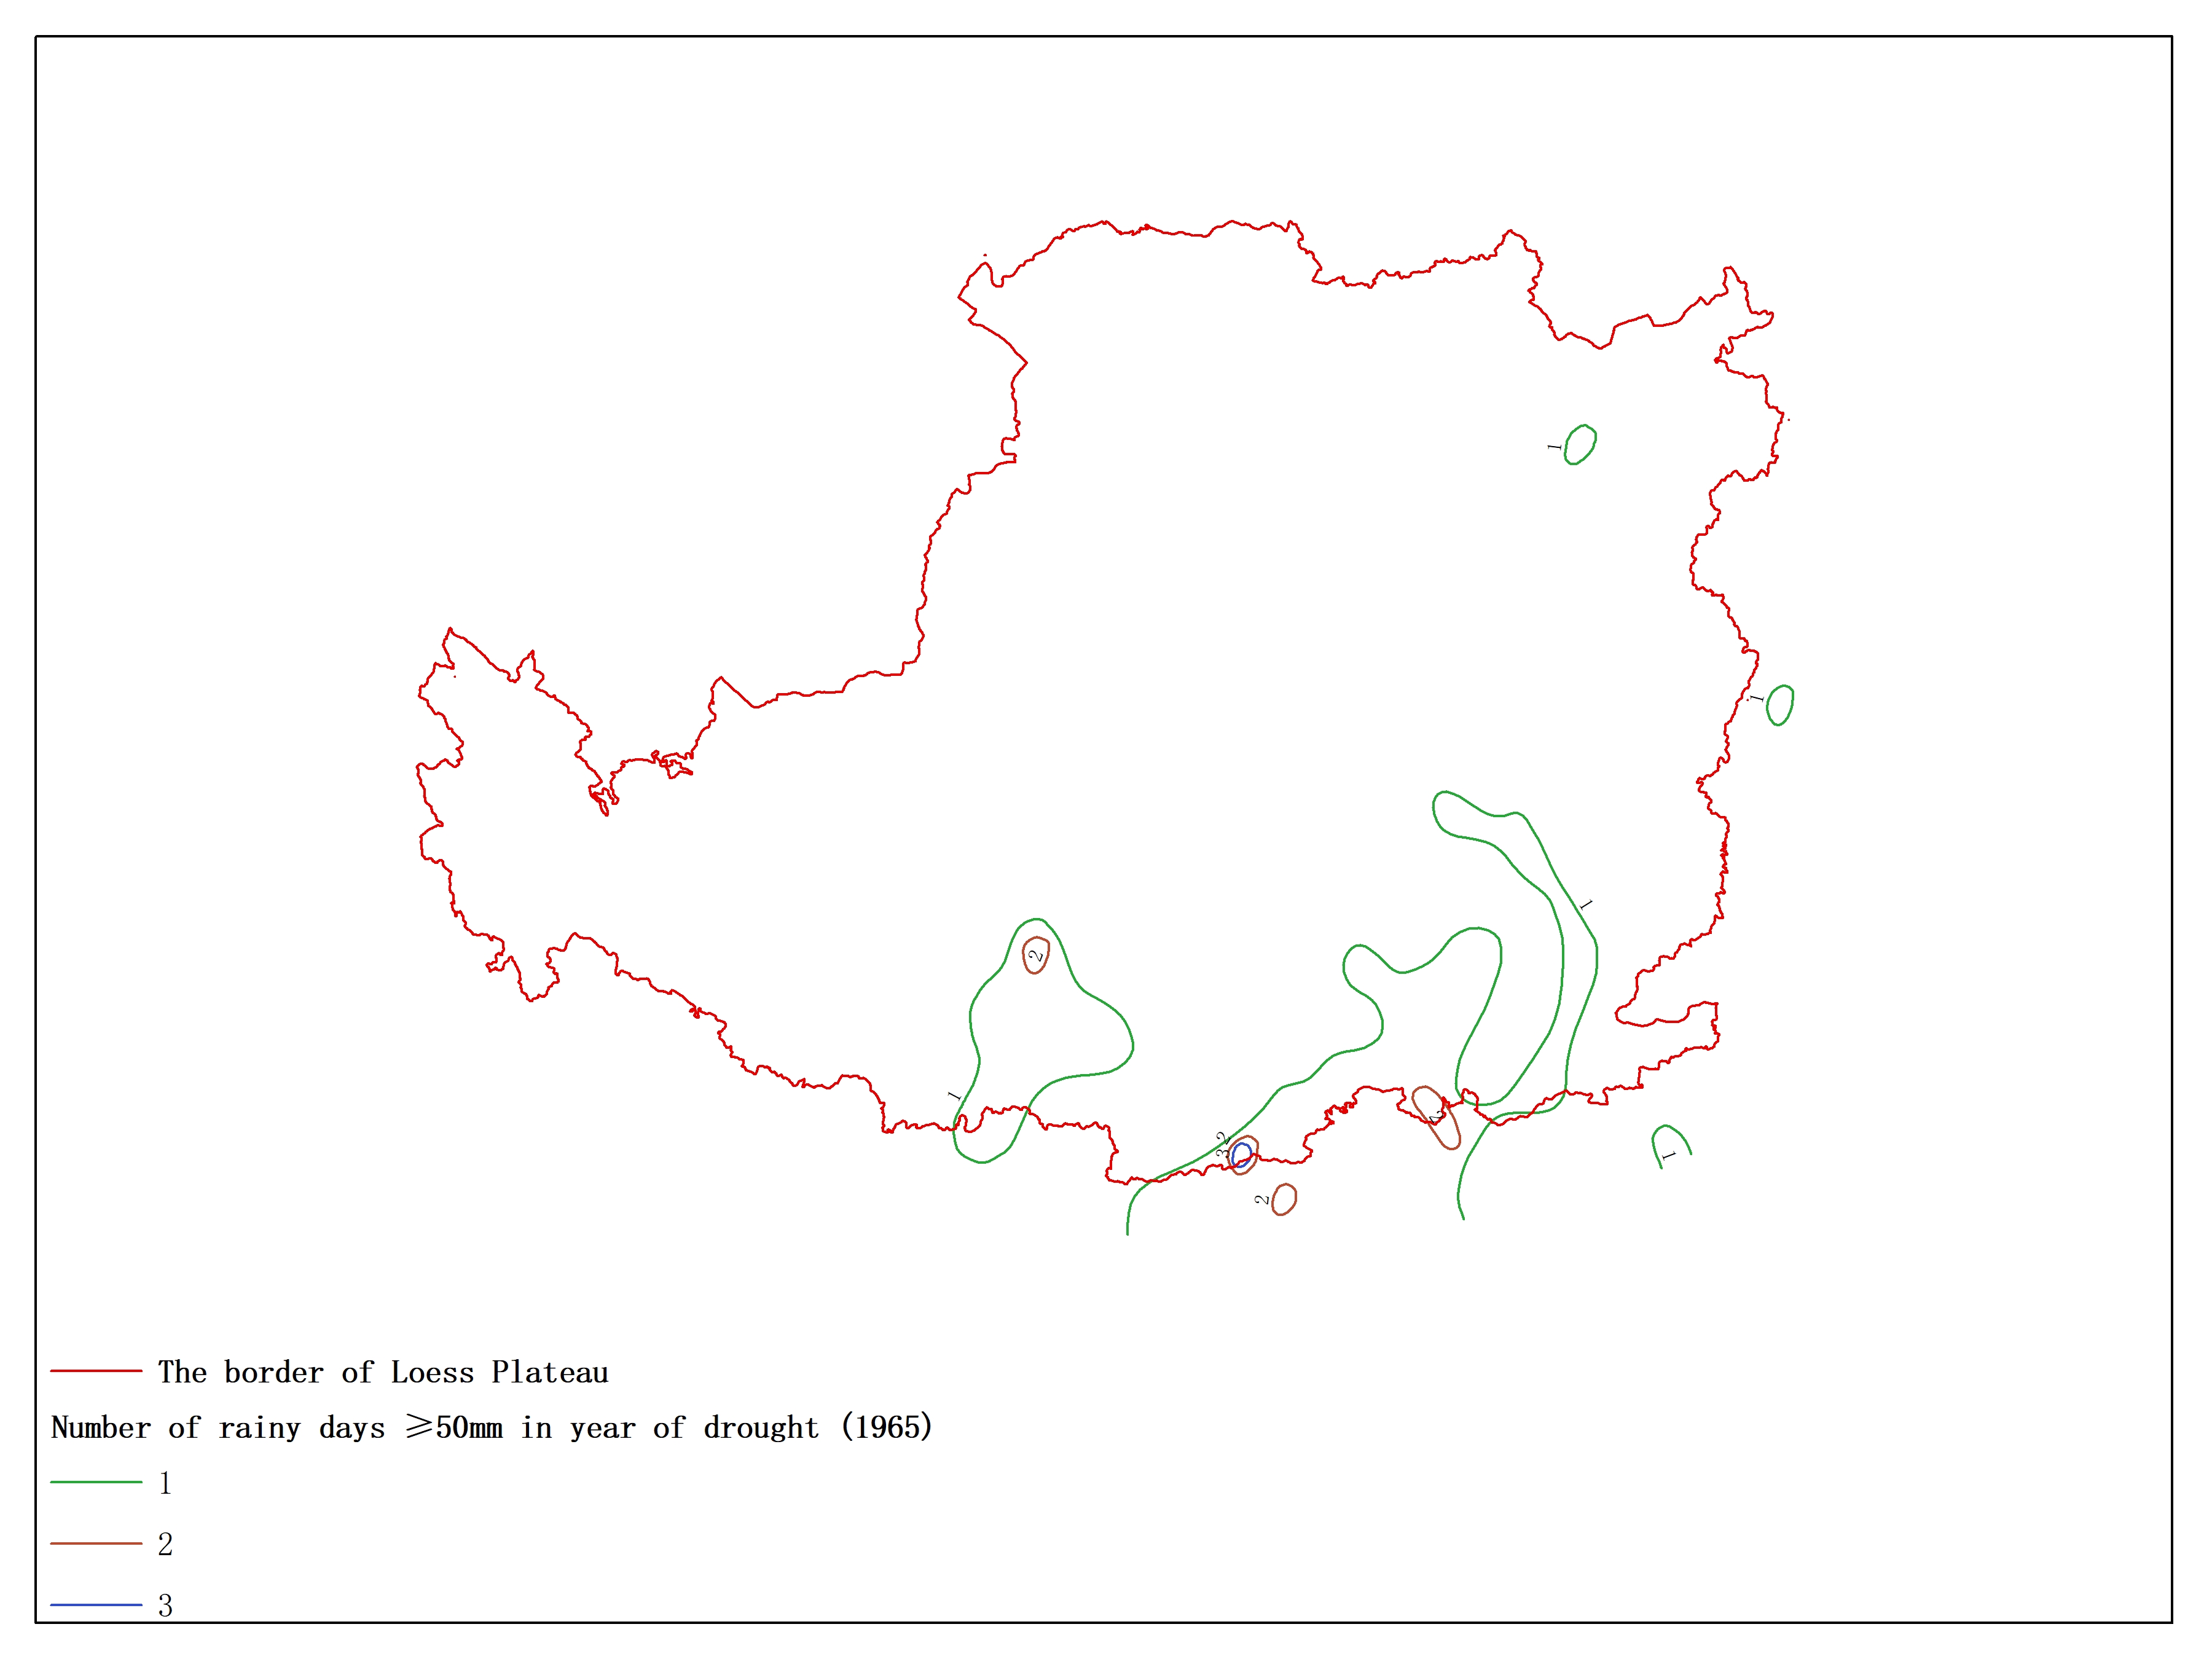 Agricultural climate resource atlas of Loess Plateau-Number of rainy days ≥50mm in year of drought (1965)